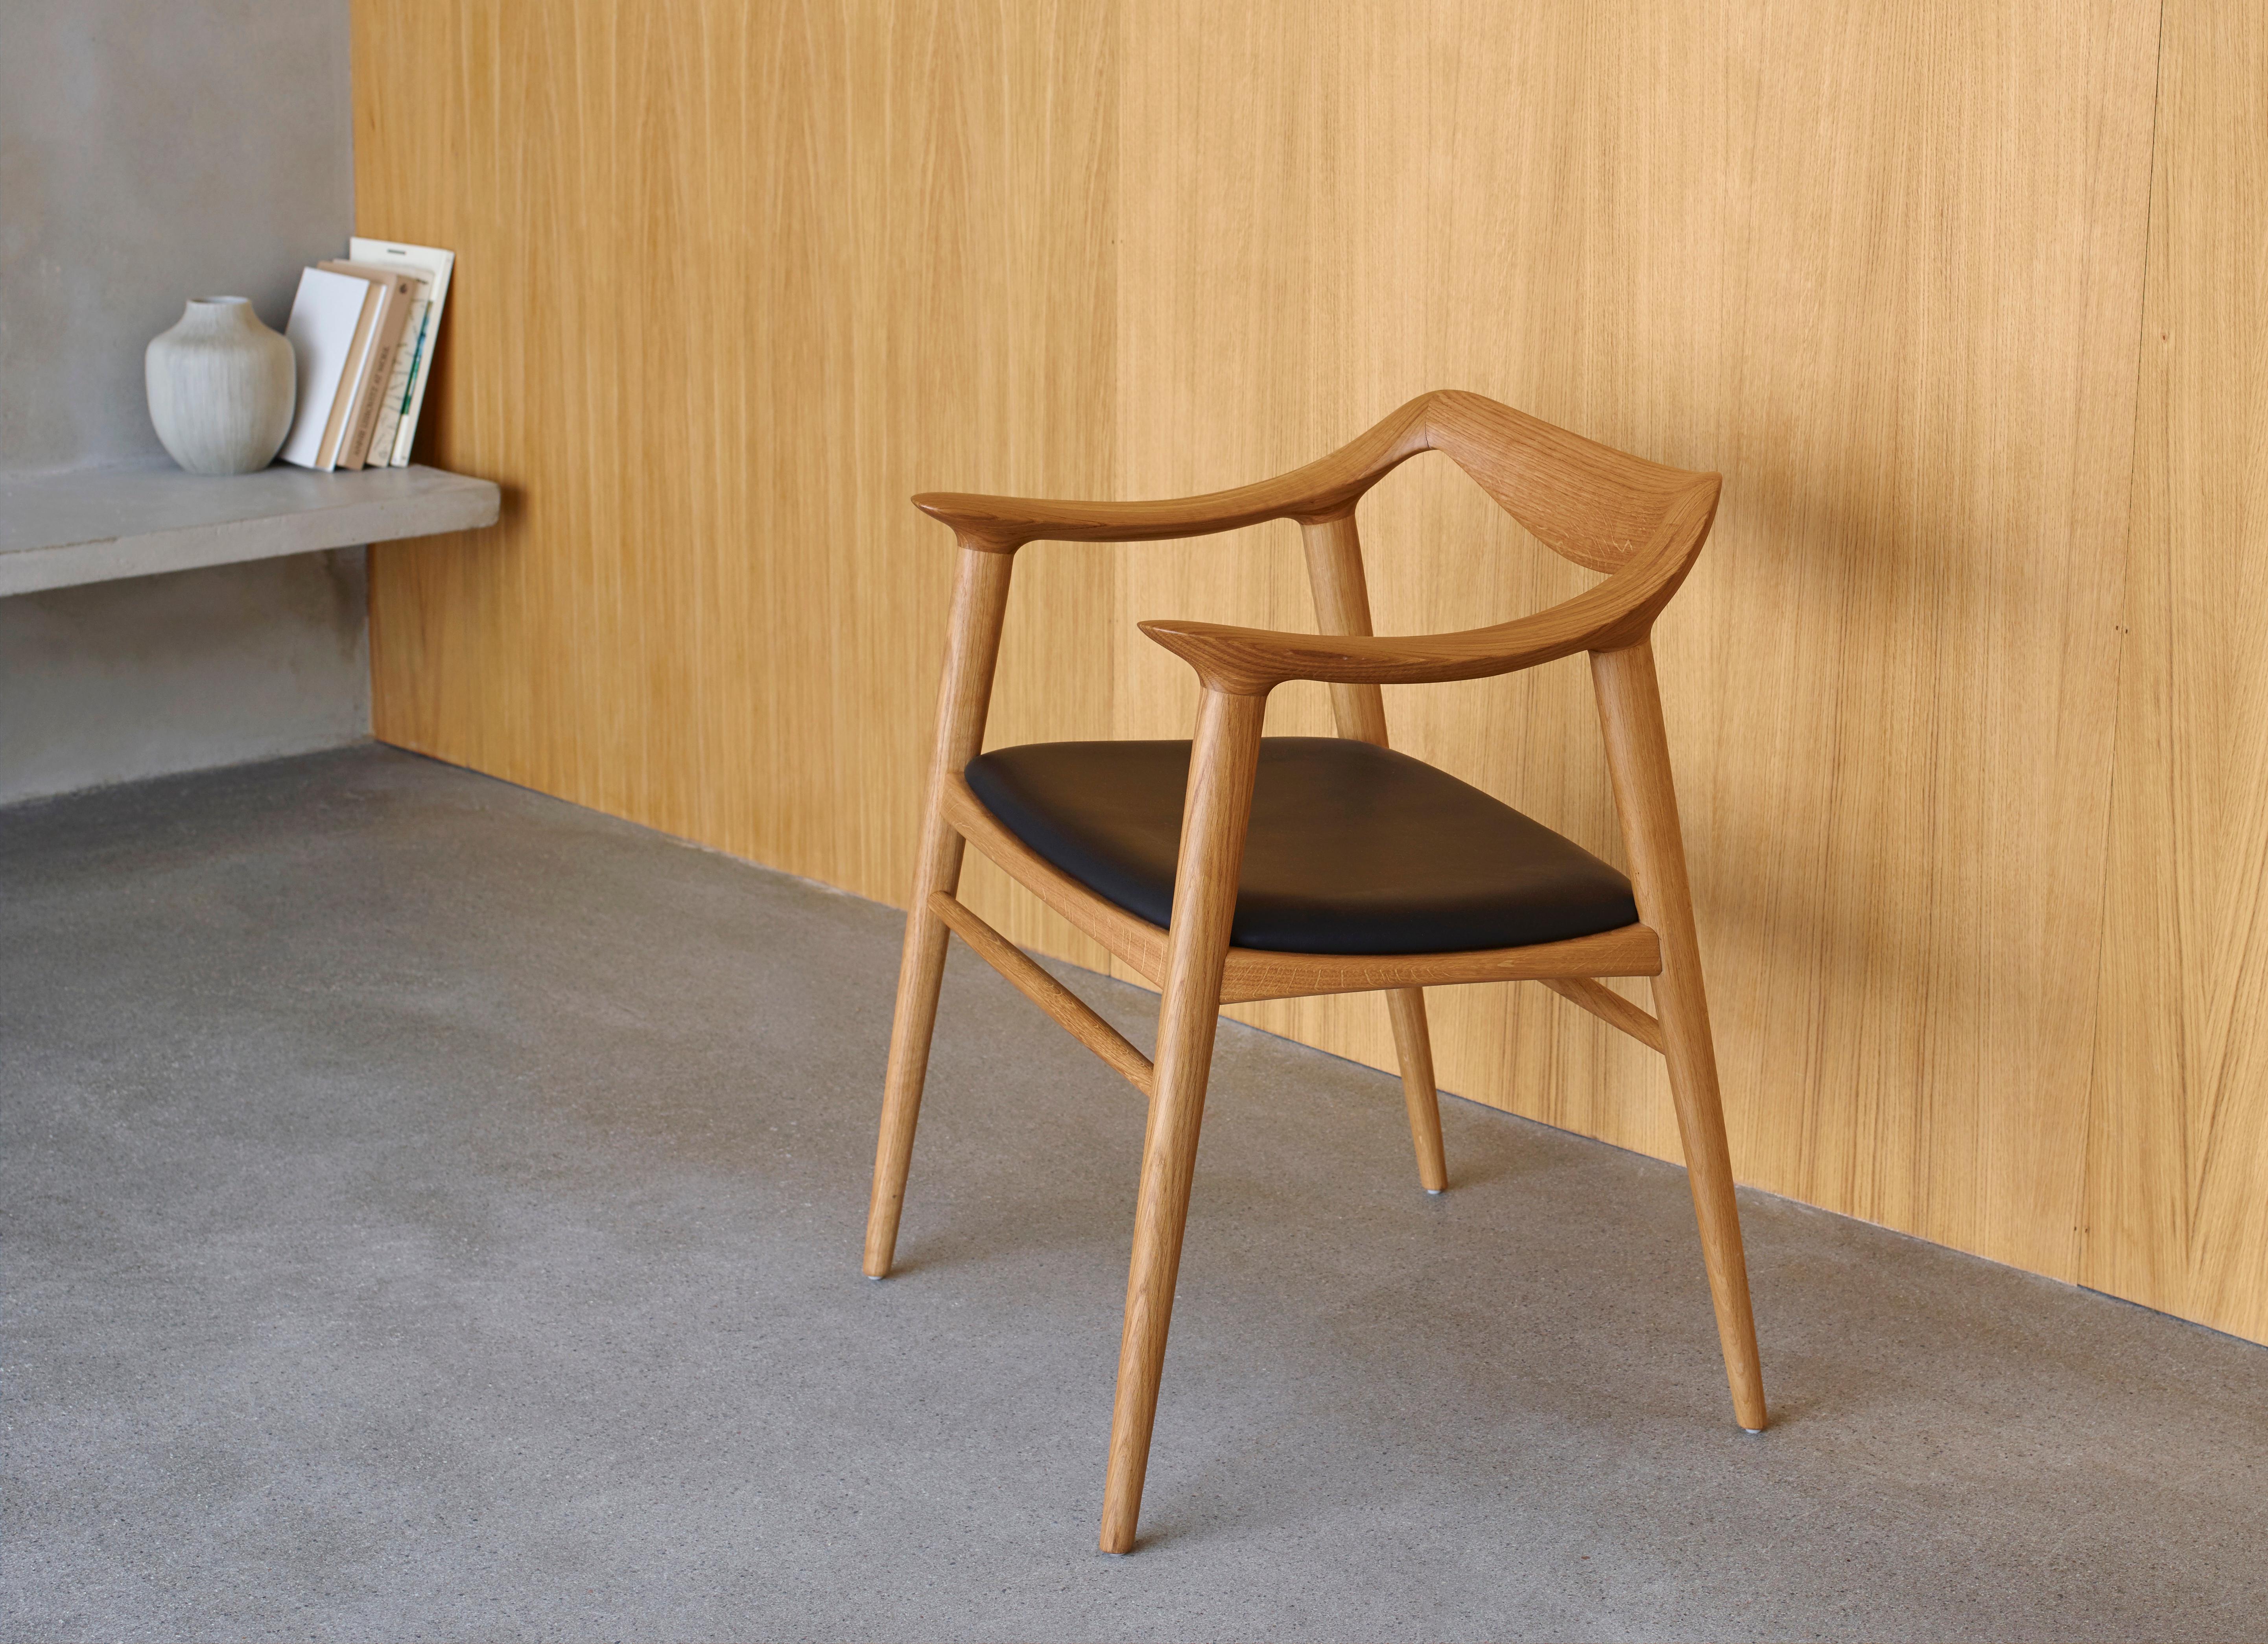 Bambi 57 Scandinavian armchair oak. New edition. Designed in 1955 by Rolf Rastad and Adolf Relling and originally produced by the Norwegian manufacturer Gustav Bahus, the Bambi 57 armchair is today returned to identical production by Fjordfiesta.